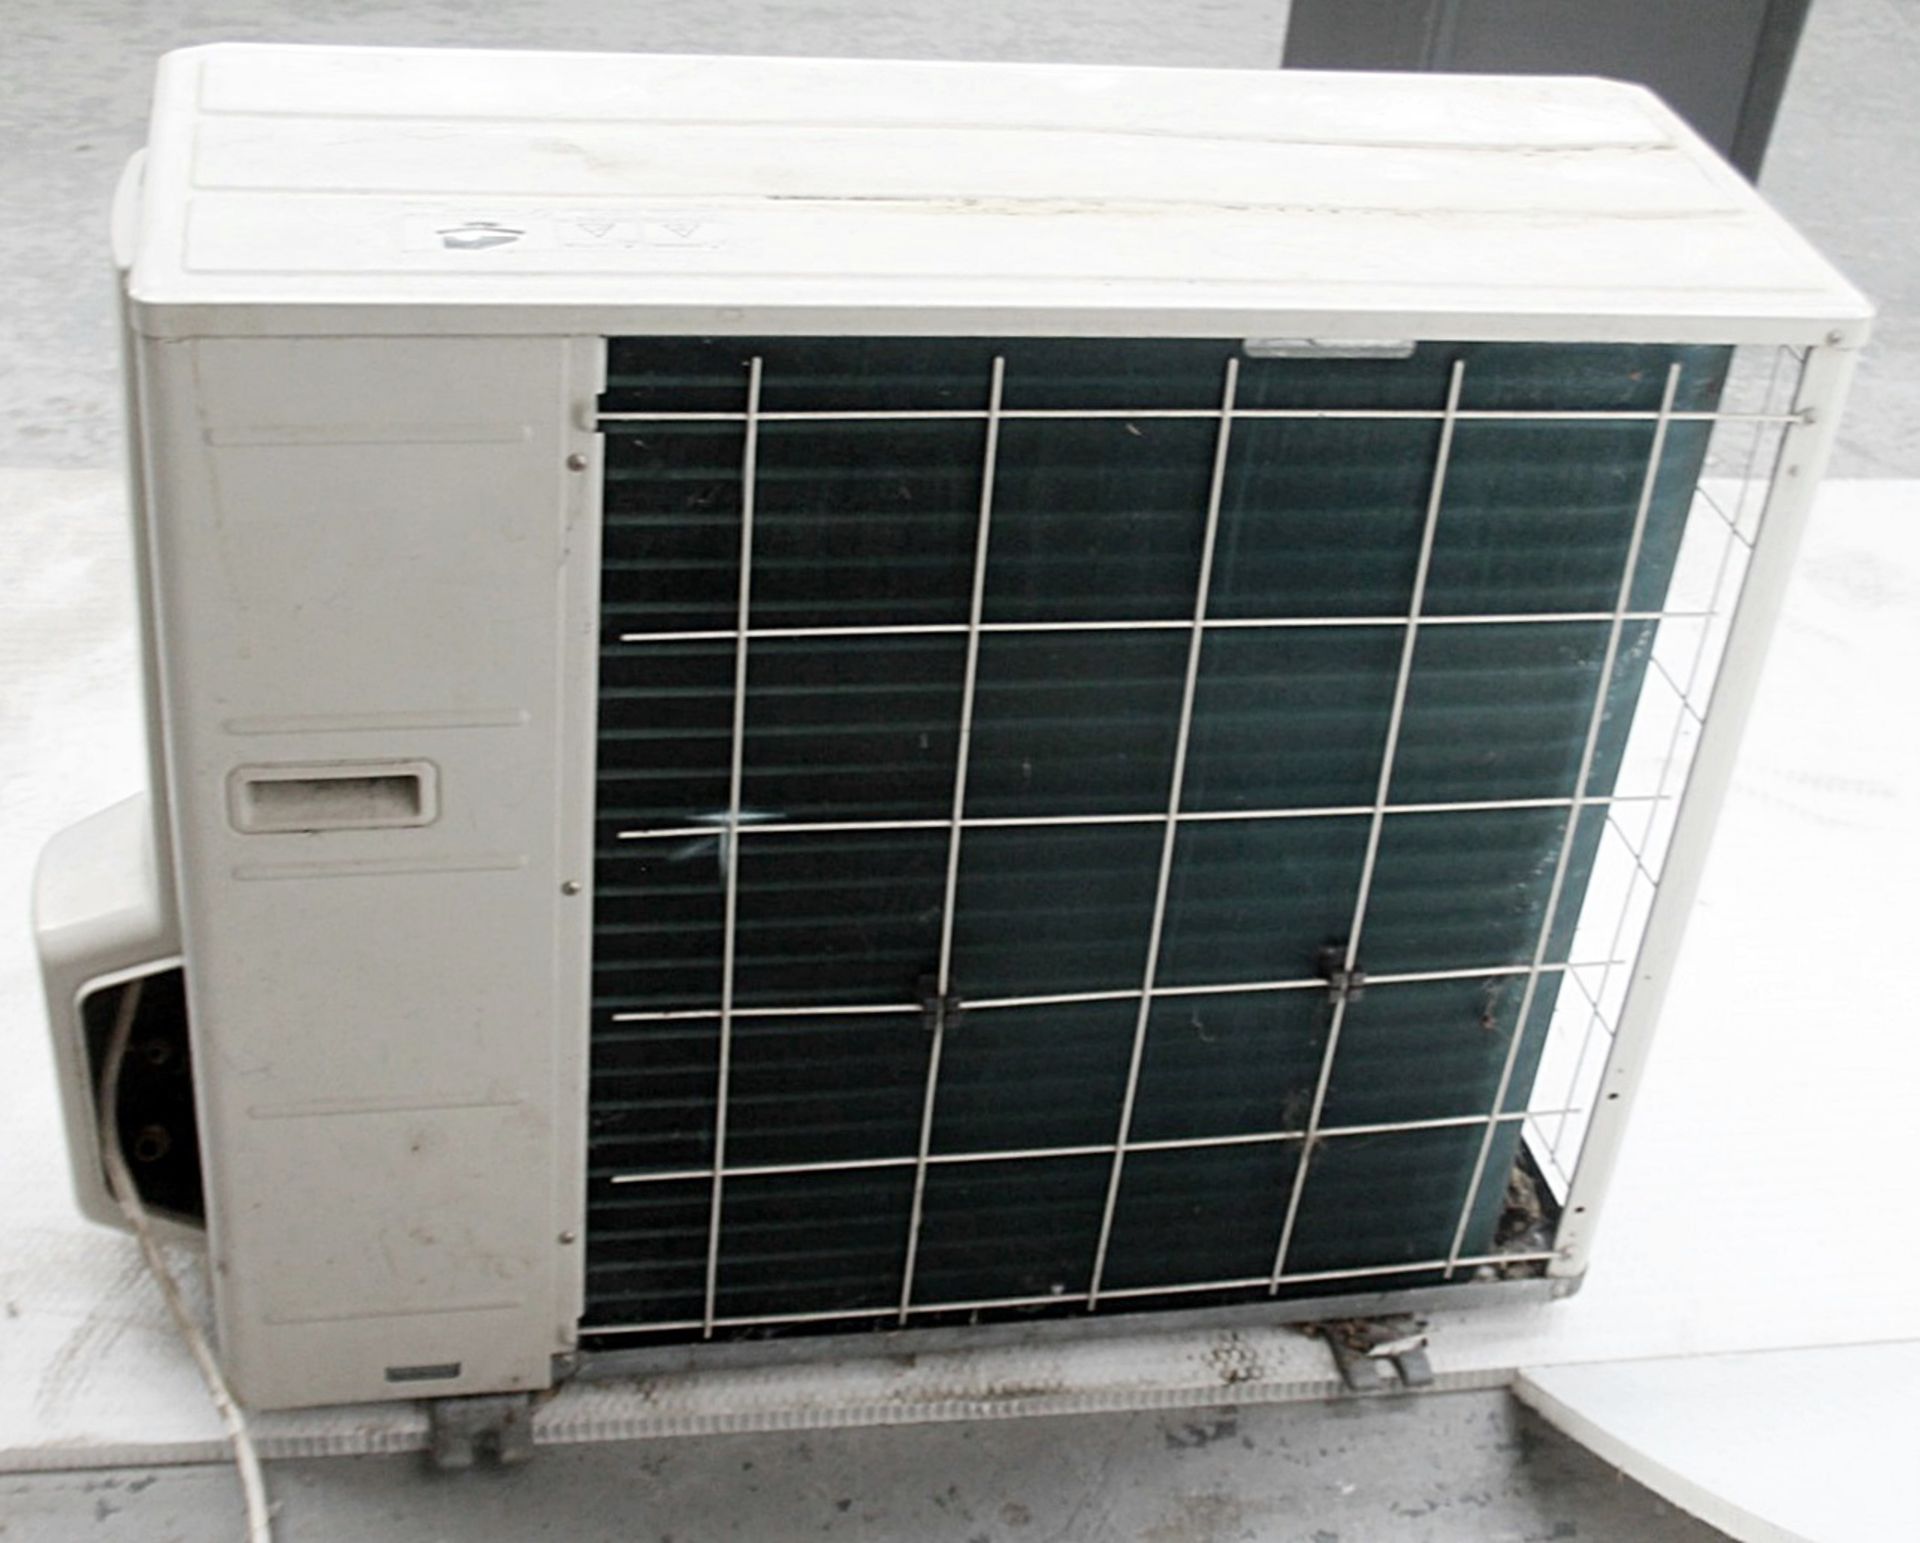 1 x Mitsubishi R410A 'Hyper Inverter' Split Type Outdoor Air Conditioning Unit - Recently Removed - Image 4 of 5